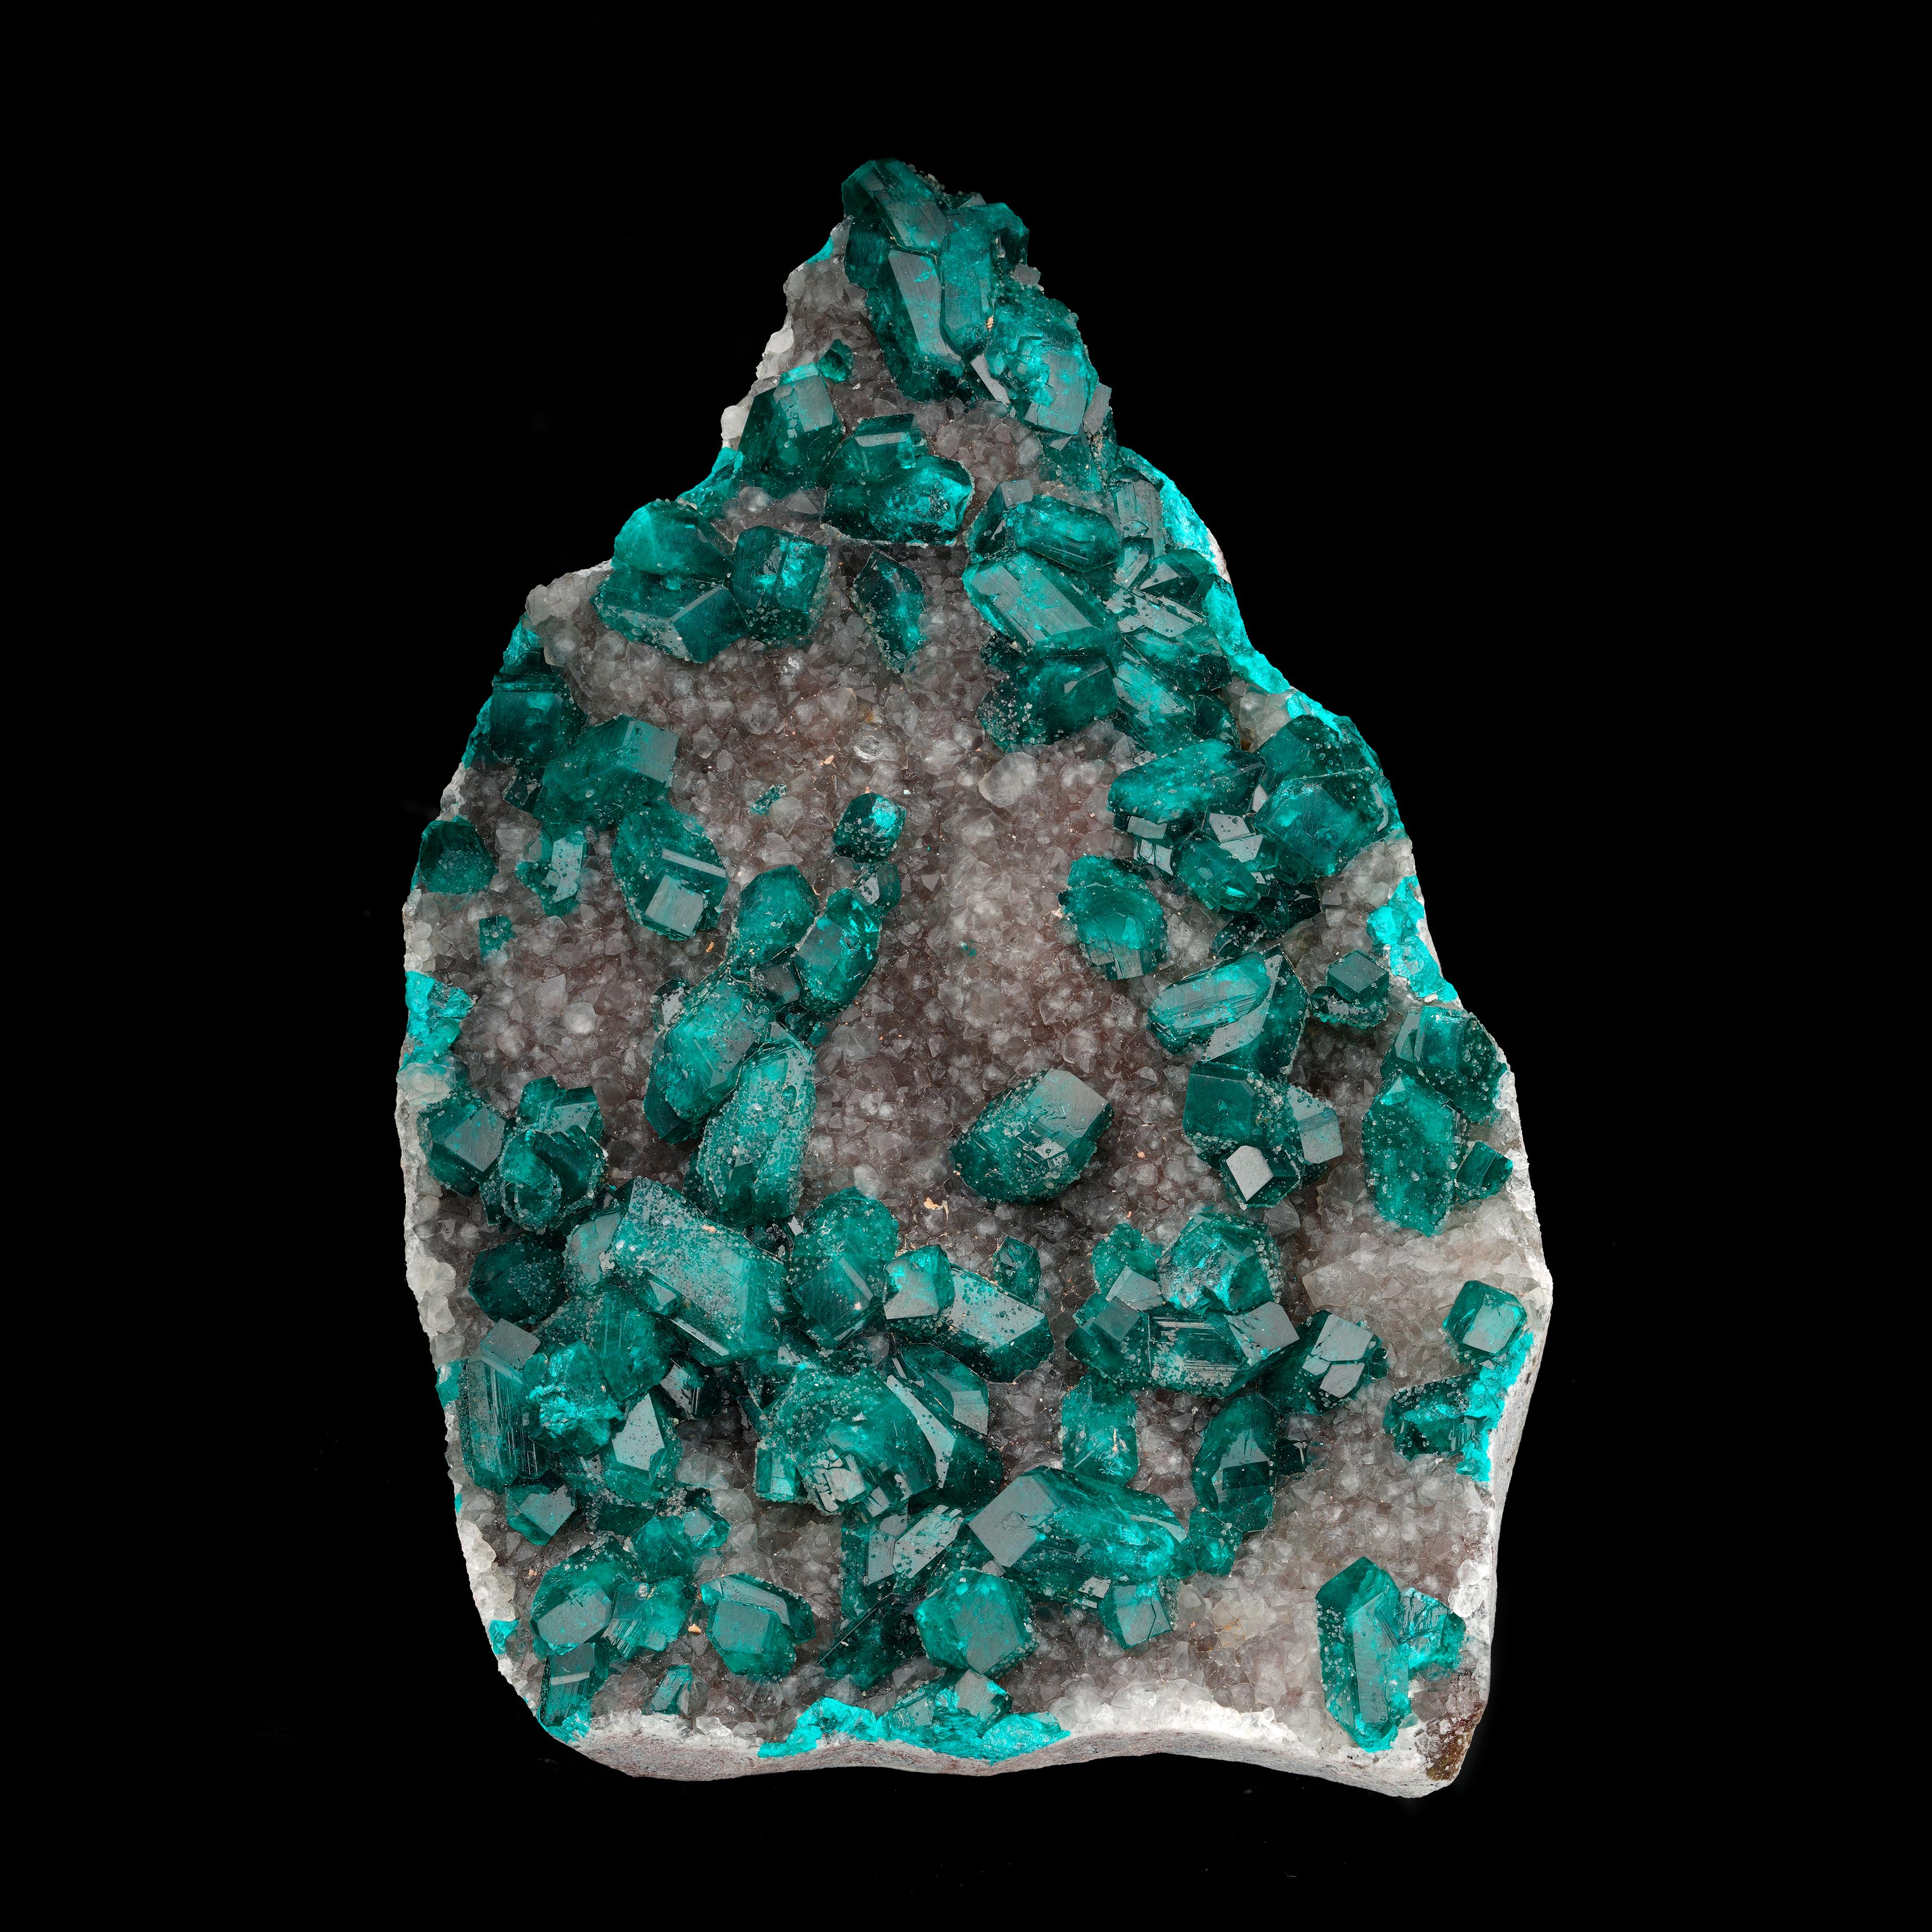 This sparkling specimen from the DRC features moderately sized, deep emerald green, fully formed and gemmy dioptase crystals growing on a thick bed of lustrous calcite crystals for a unique and aesthetic combination piece perfect for